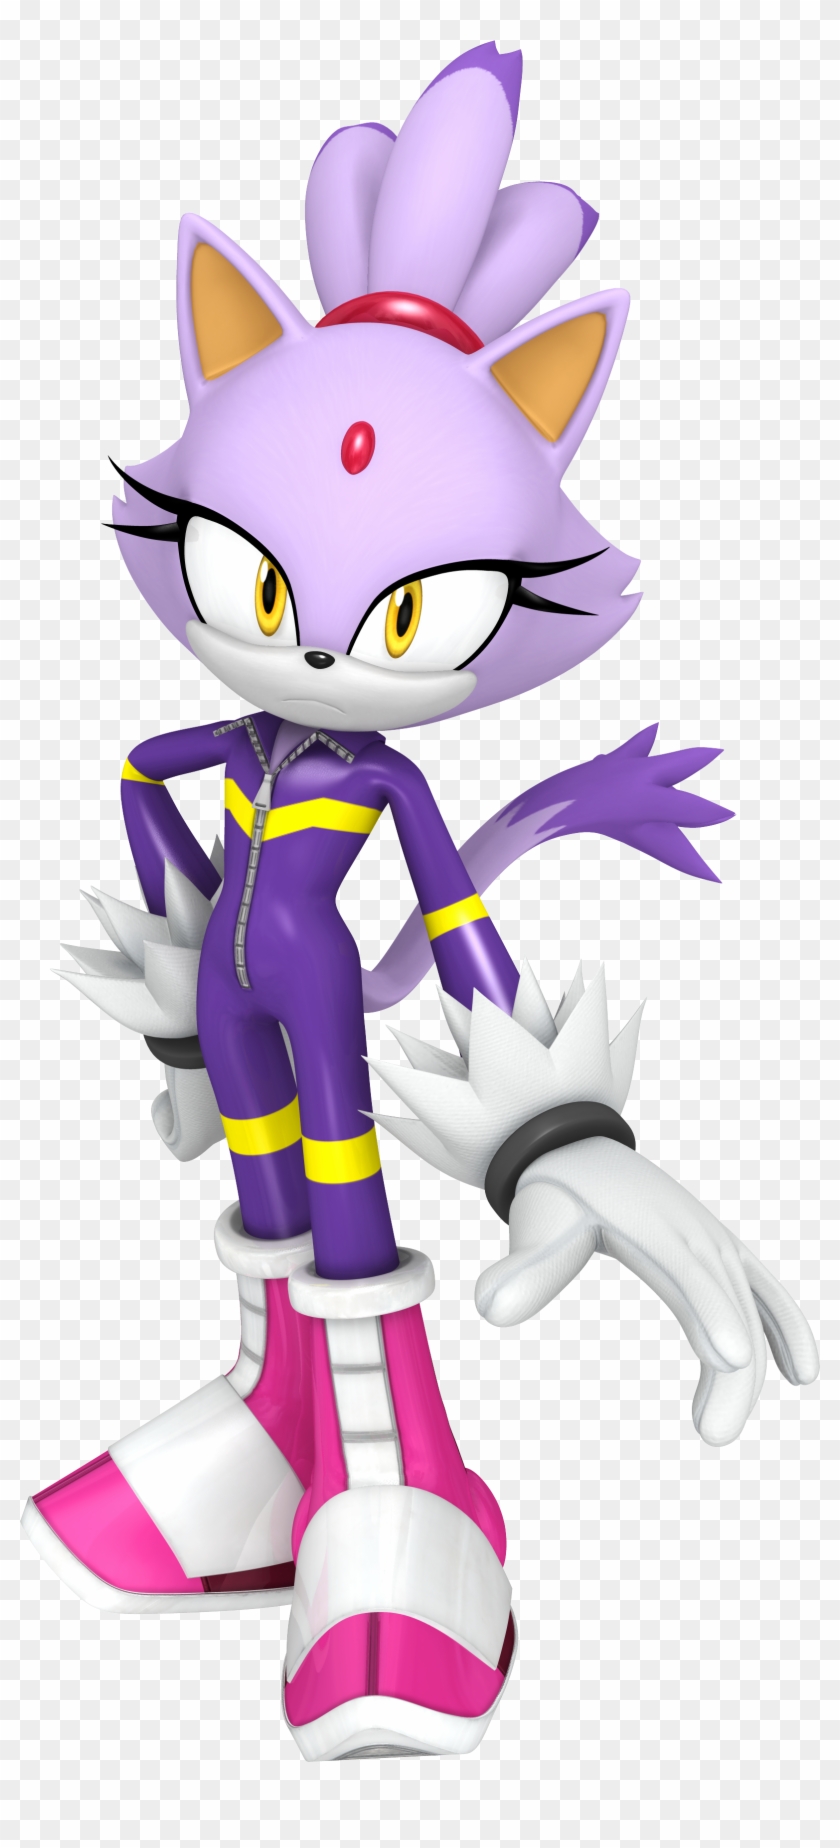 Latest Sonic Costume, Eggman, Silver The Hedgehog, - Blaze The Cat Sonic Free Riders Clipart #4104636